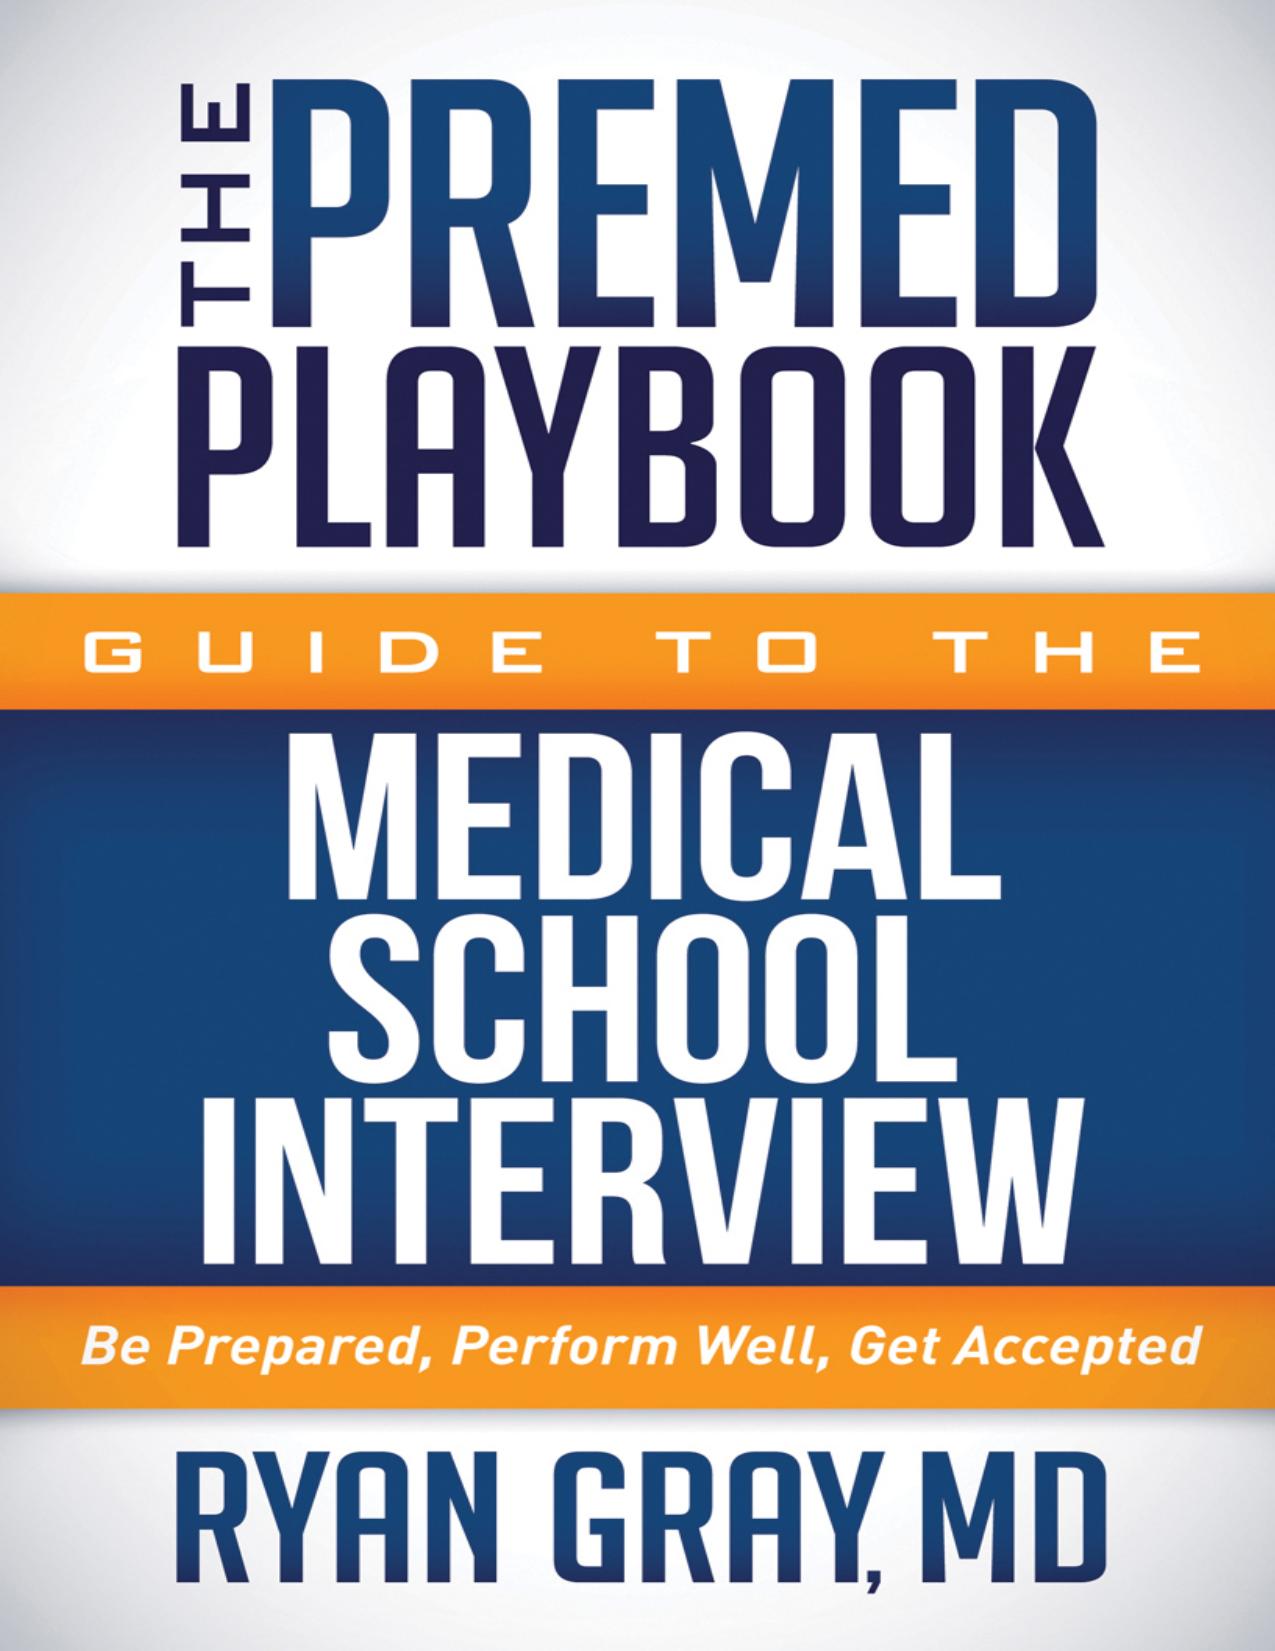 The premed playbook guide to the medical school interview be prepared , perform well, get accepted by Ryan Gray MD